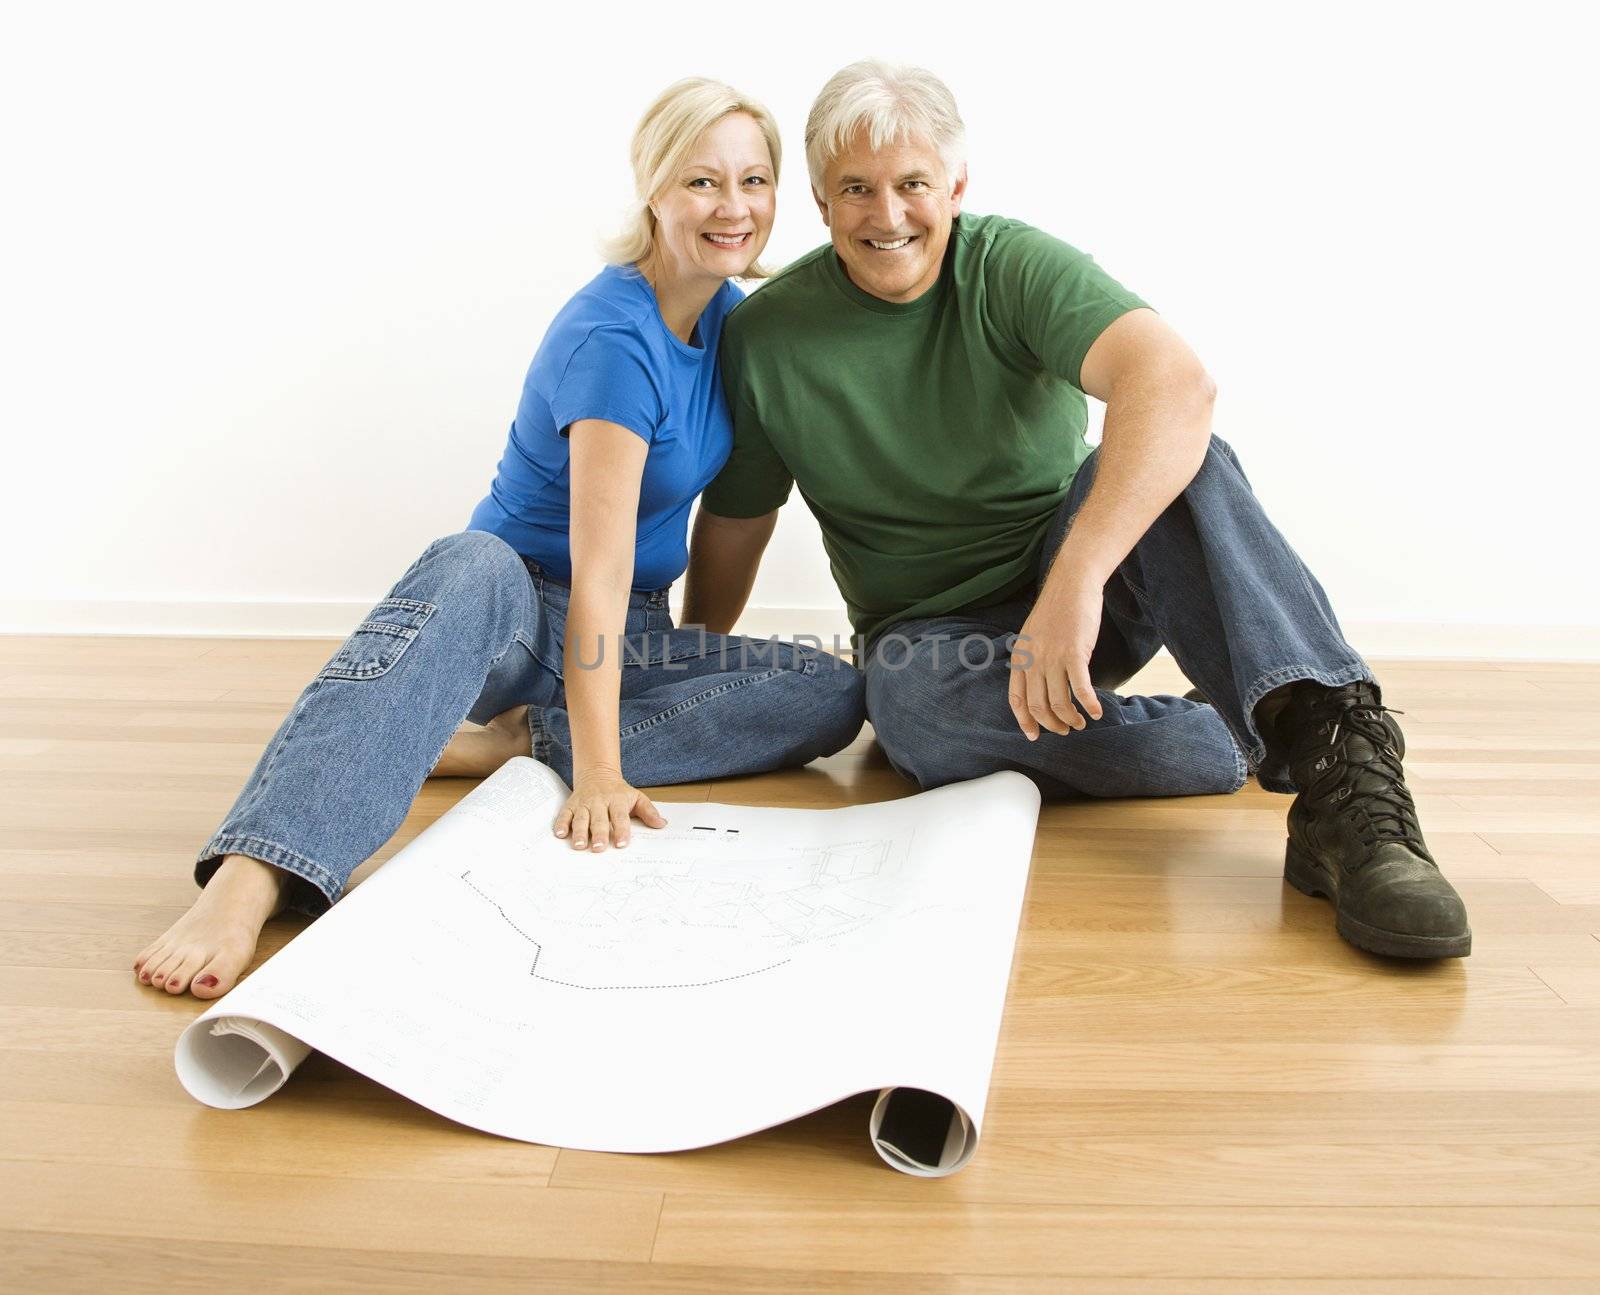 Middle-aged couple sitting on floor with architectural blueprints.